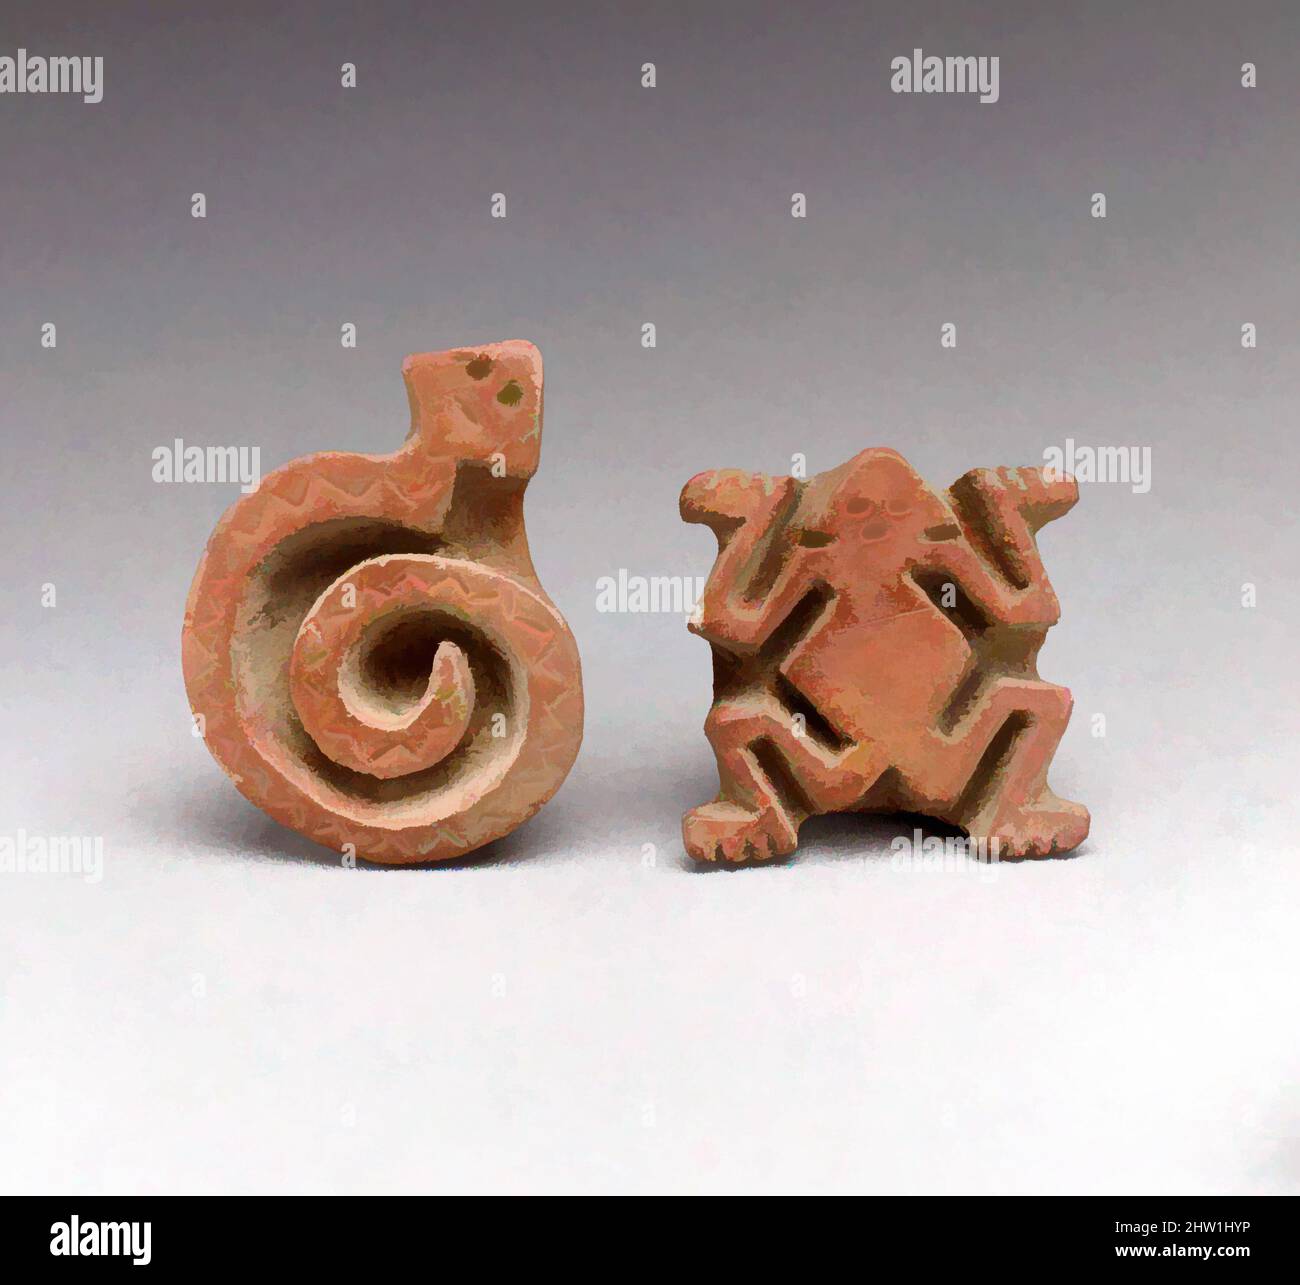 Art inspired by Two Flat Stamps, 1st–7th century, Costa Rica, Atlantic Watershed, Ceramic, H. 1 15/32 x W. 2 3/32 in. (3.7 x 5.3 cm), Ceramics-Implements, Ceramic stamps are found in Costa Rican burials, suggesting that their importance extended beyond utilitarian. Much speculation has, Classic works modernized by Artotop with a splash of modernity. Shapes, color and value, eye-catching visual impact on art. Emotions through freedom of artworks in a contemporary way. A timeless message pursuing a wildly creative new direction. Artists turning to the digital medium and creating the Artotop NFT Stock Photo